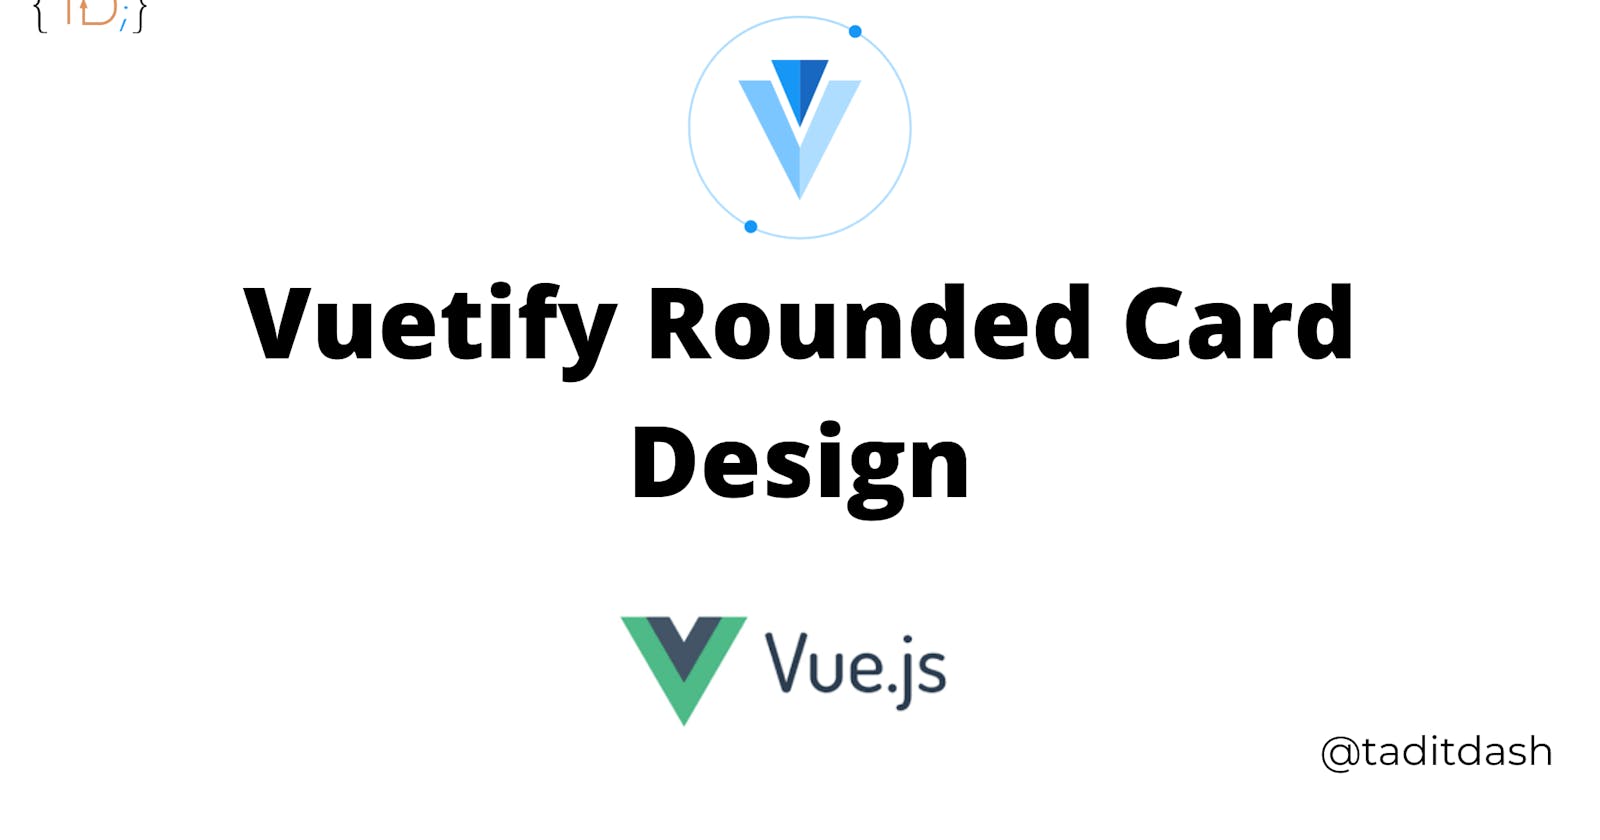 Vuetify Rounded Card Design